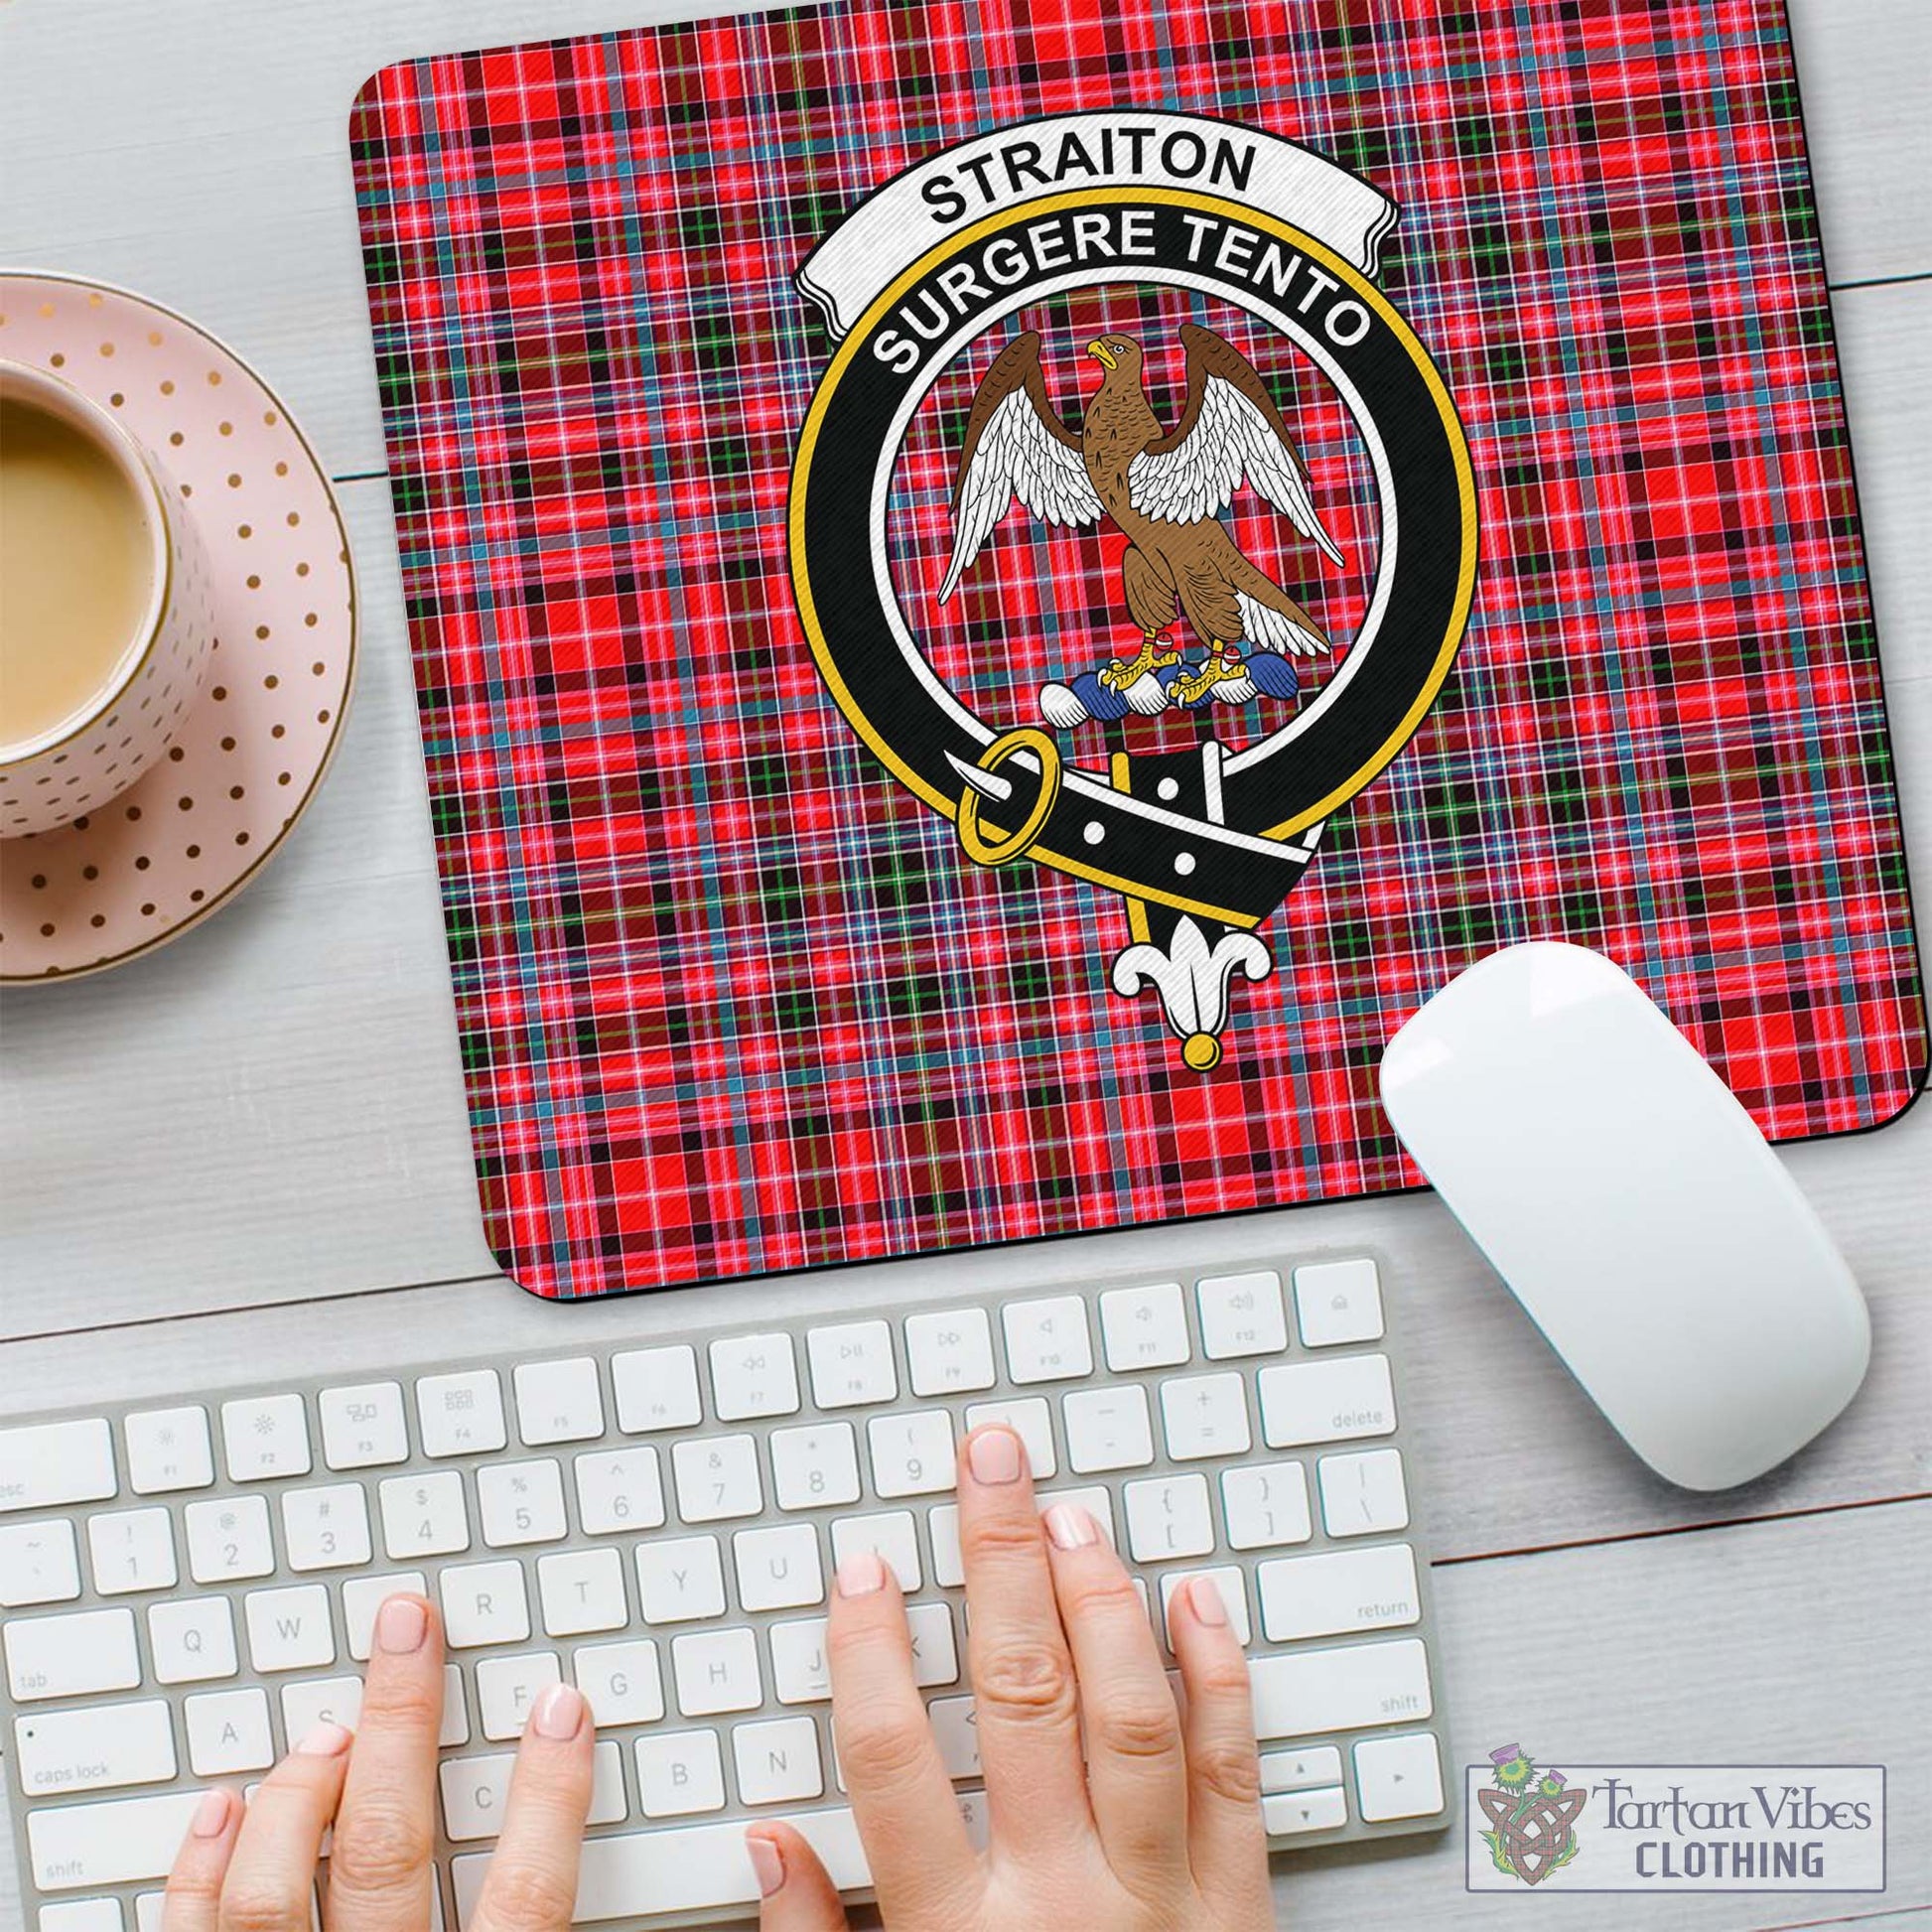 Tartan Vibes Clothing Straiton Tartan Mouse Pad with Family Crest